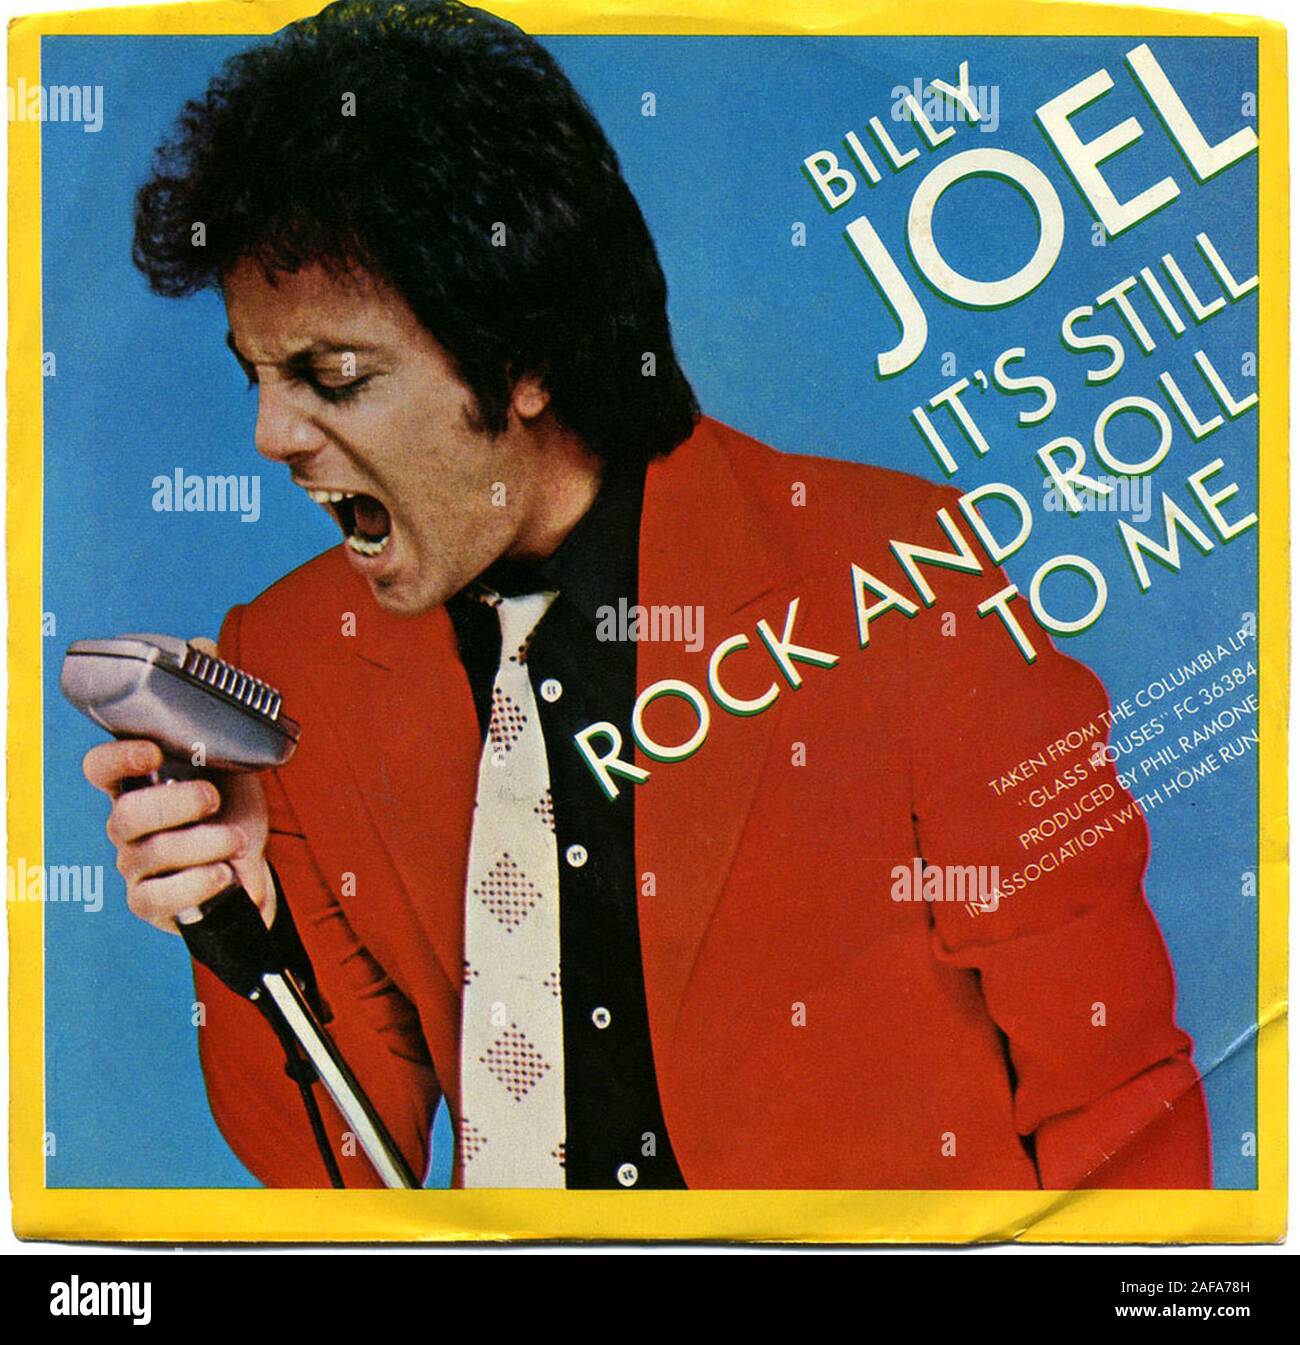 Billy Joel - It's Still Rock And Roll To Me - Vintage vinyl album cover  Stock Photo - Alamy